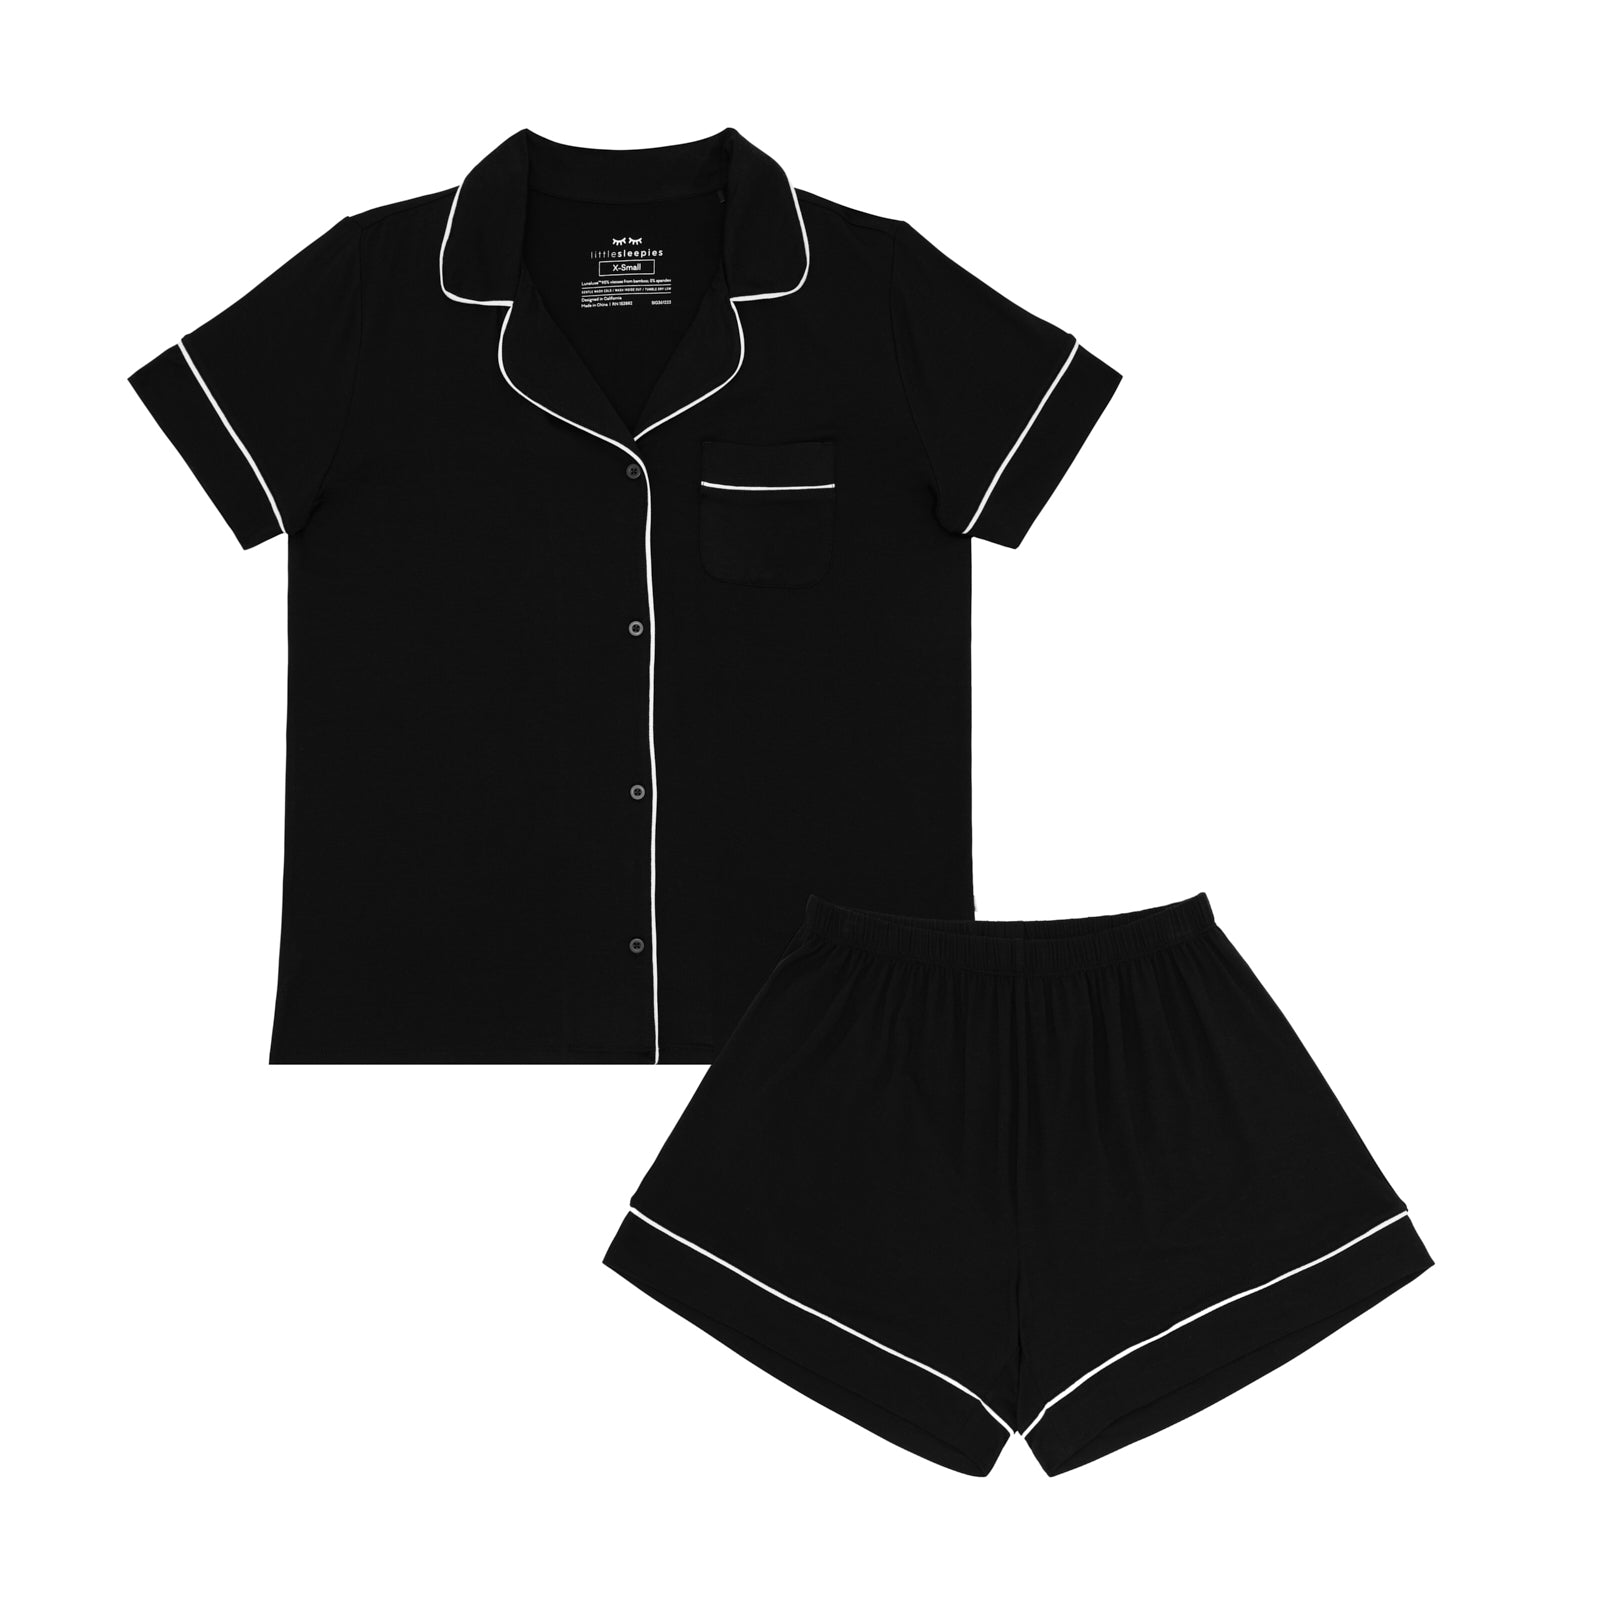 Flat lay image of a solid Black women's short sleeve and shorts pajama set